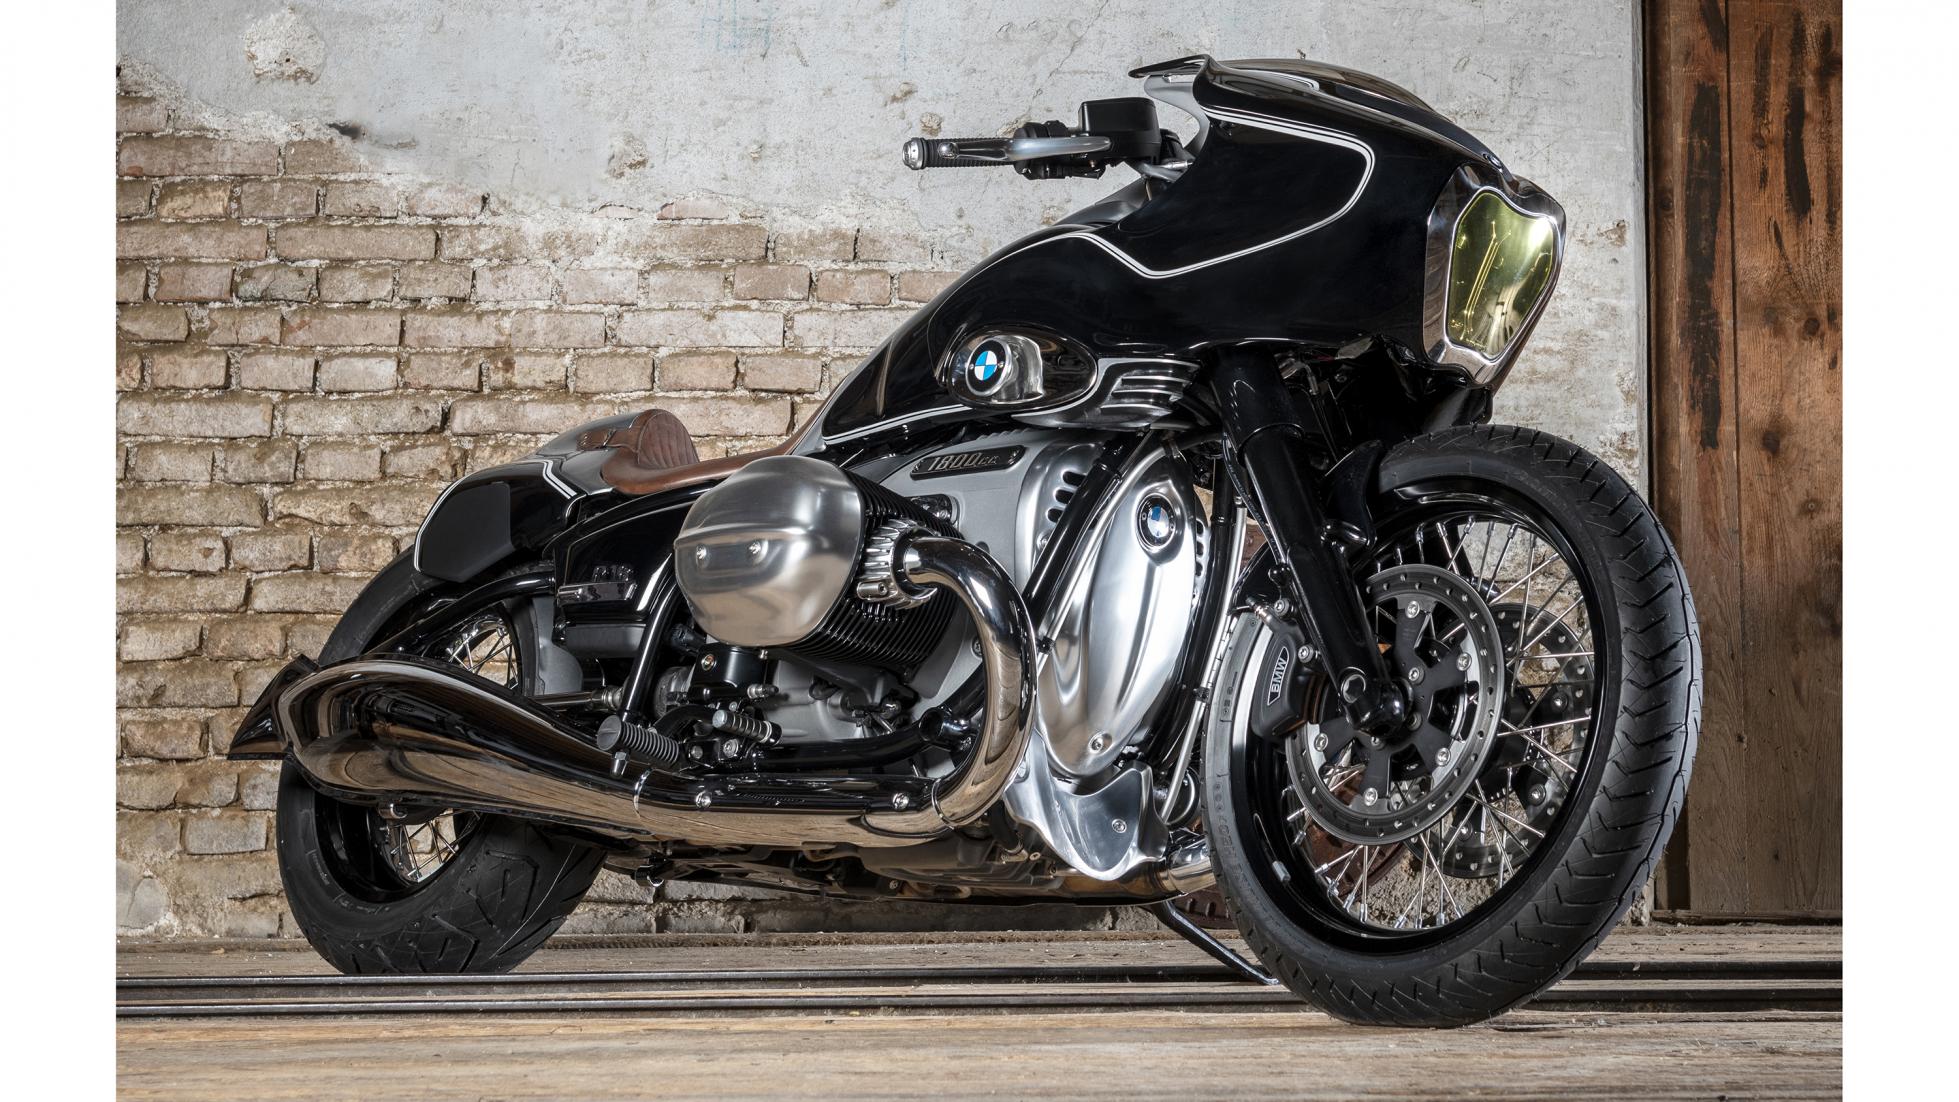 This one-off BMW R18 looks straight out of Sin City